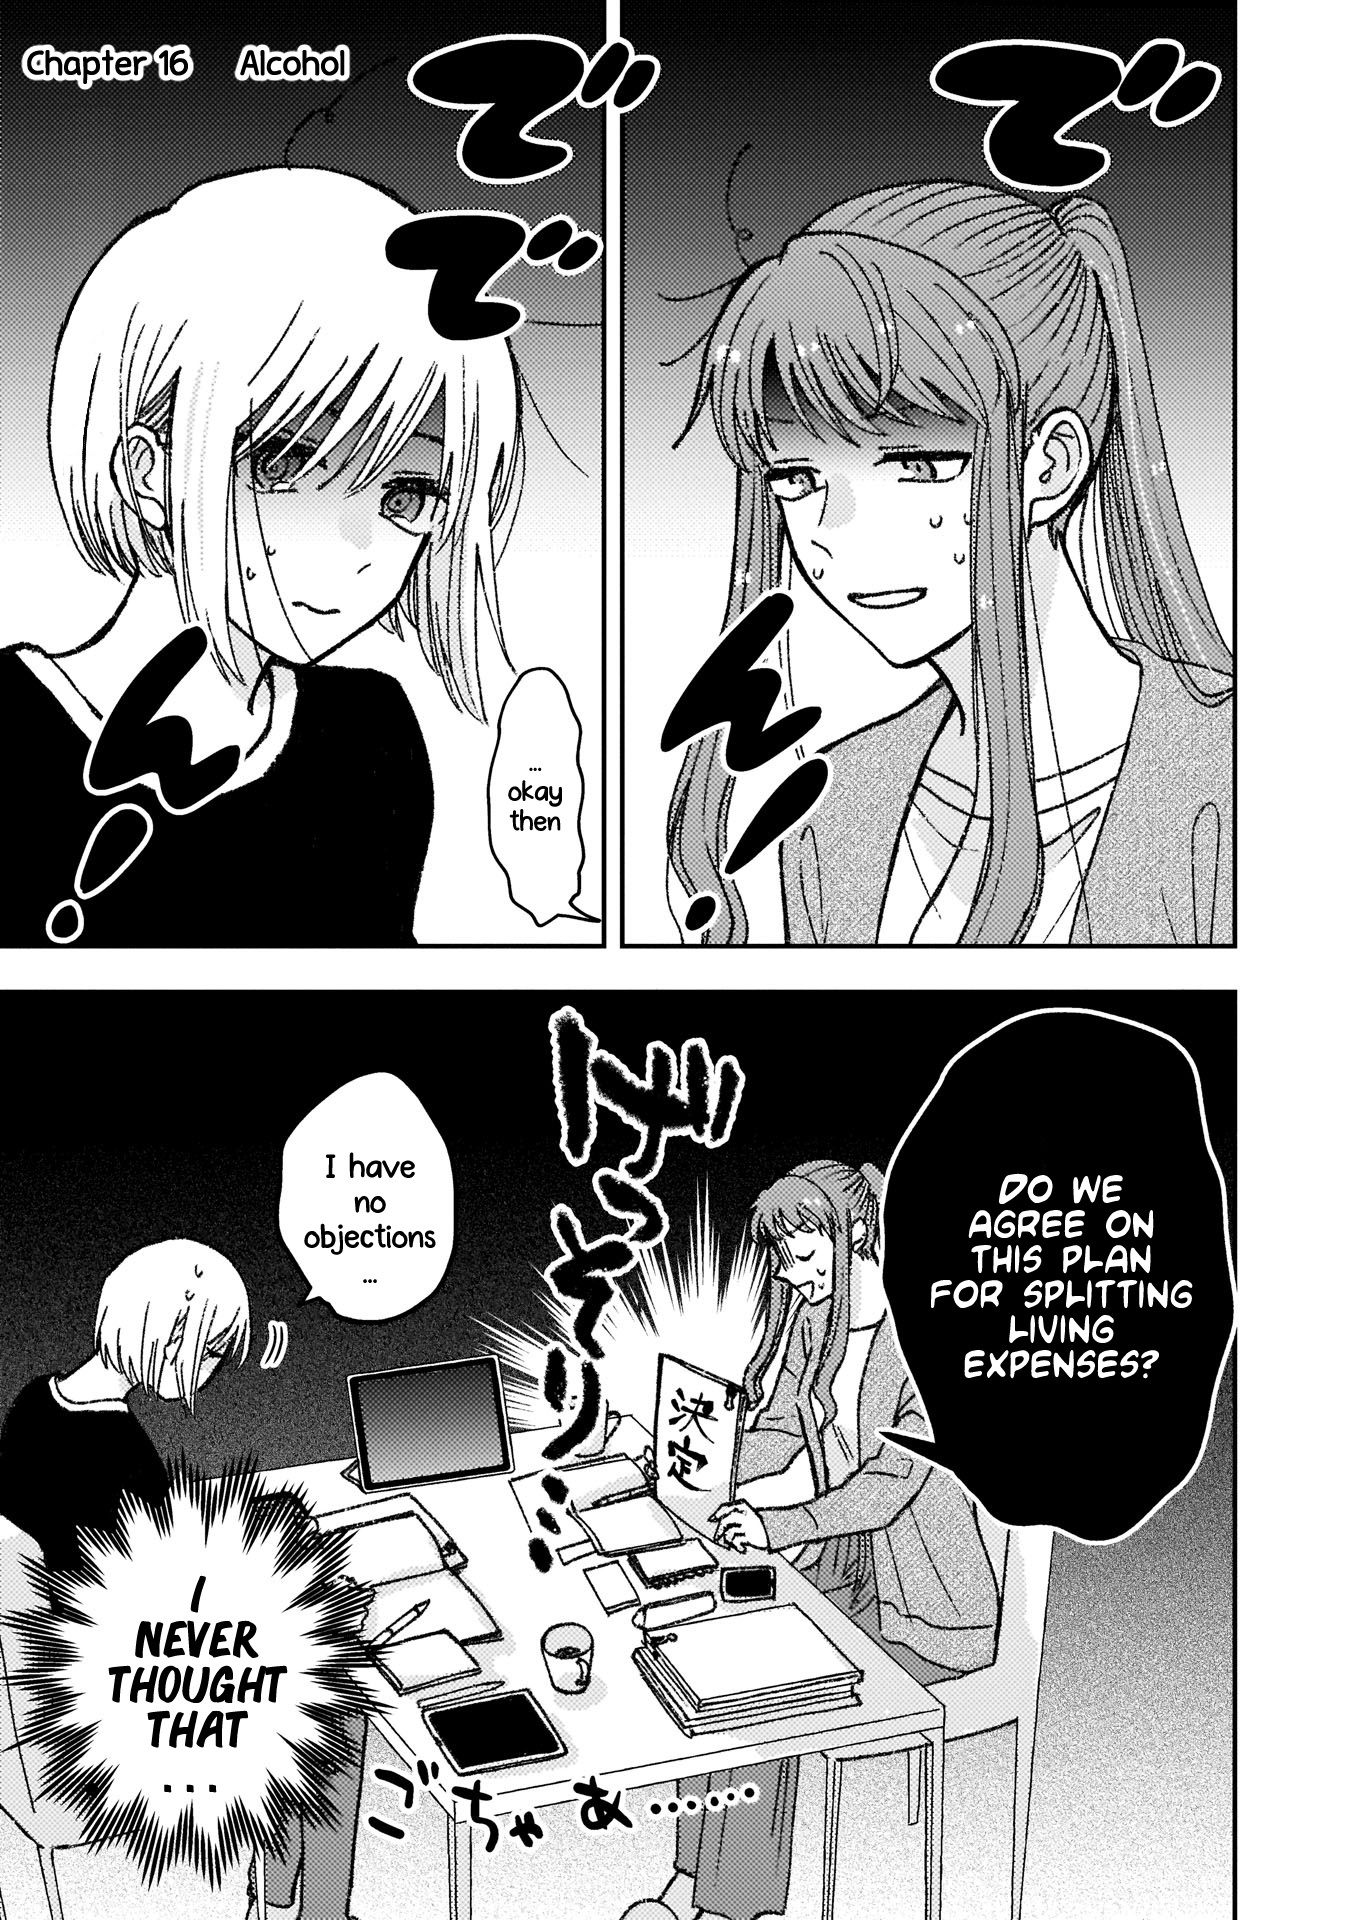 With Her Who Likes My Sister Vol.2 Chapter 16: Alcohol - Picture 1